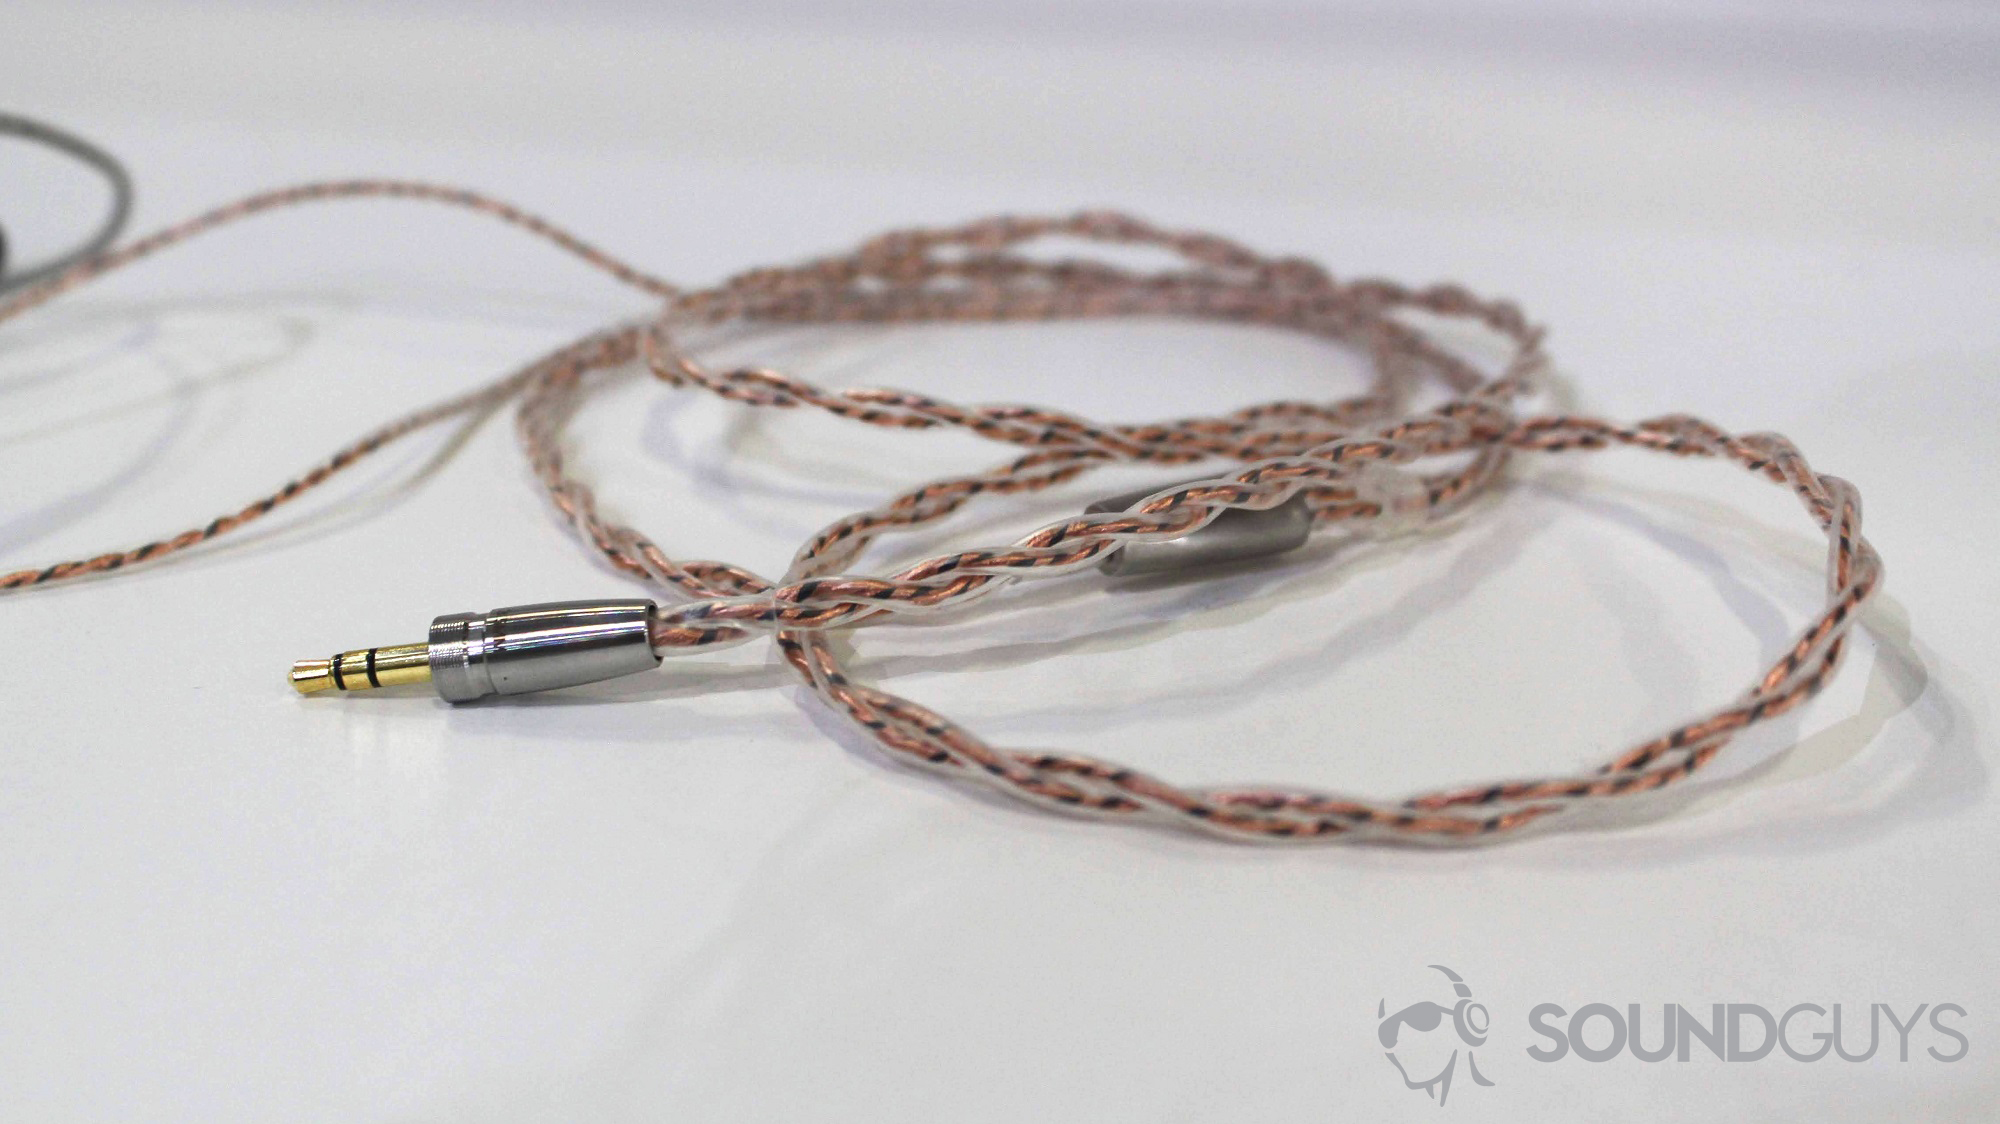 The RHA CL2 Planar headphones cable and jack.